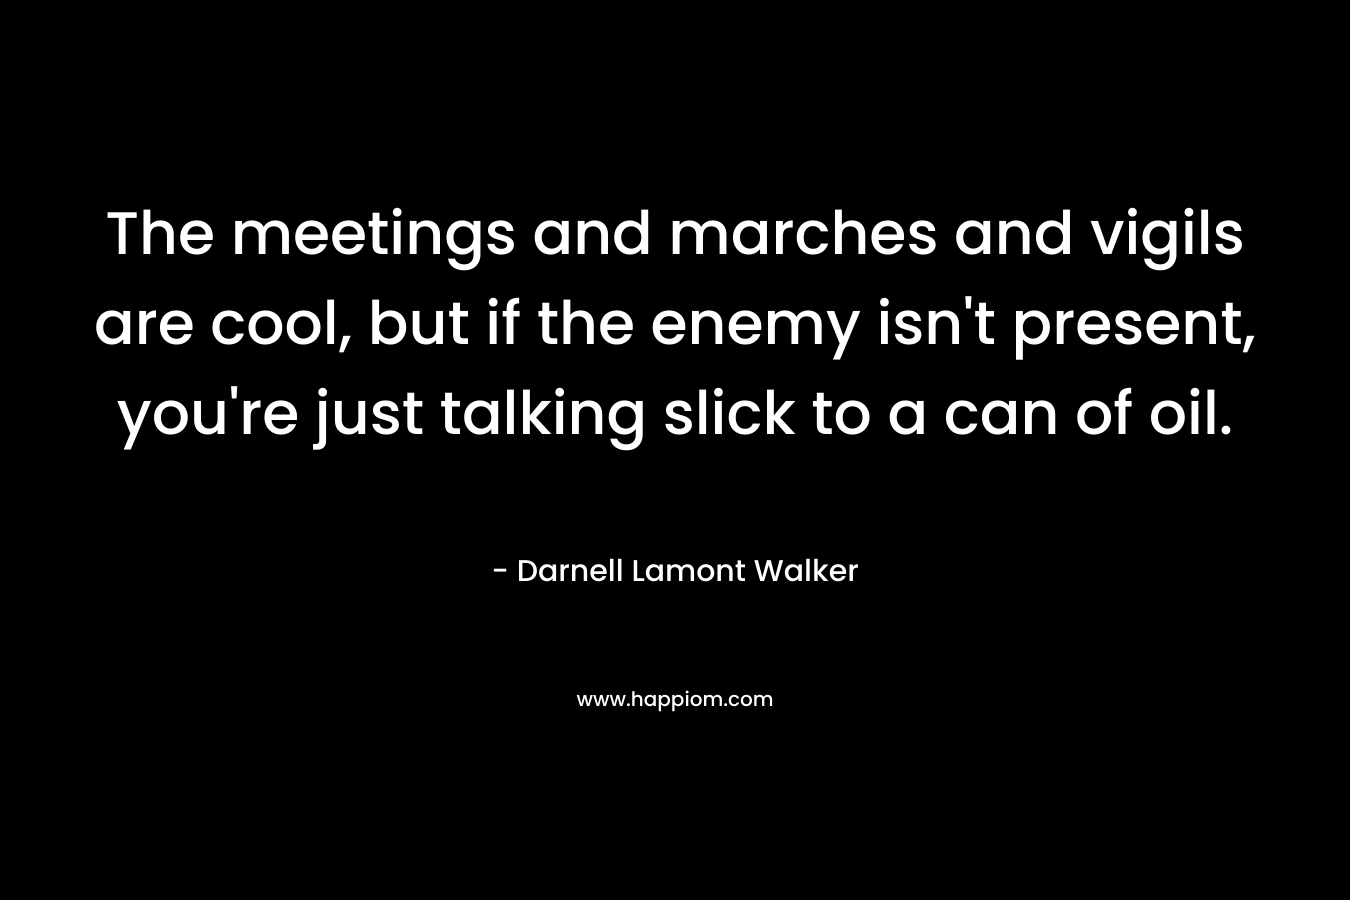 The meetings and marches and vigils are cool, but if the enemy isn't present, you're just talking slick to a can of oil.